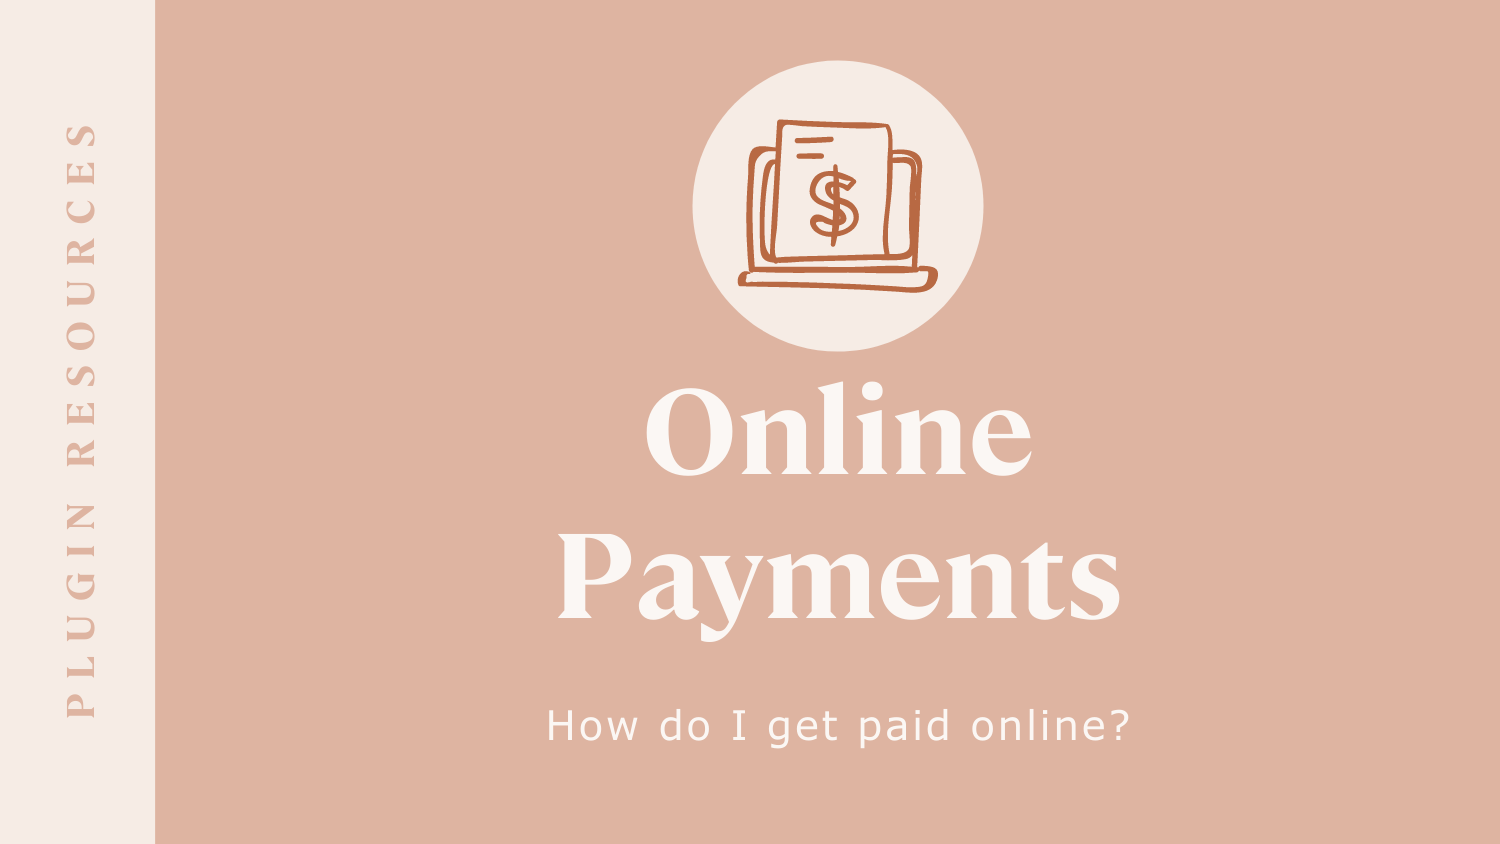 How do I get paid online?